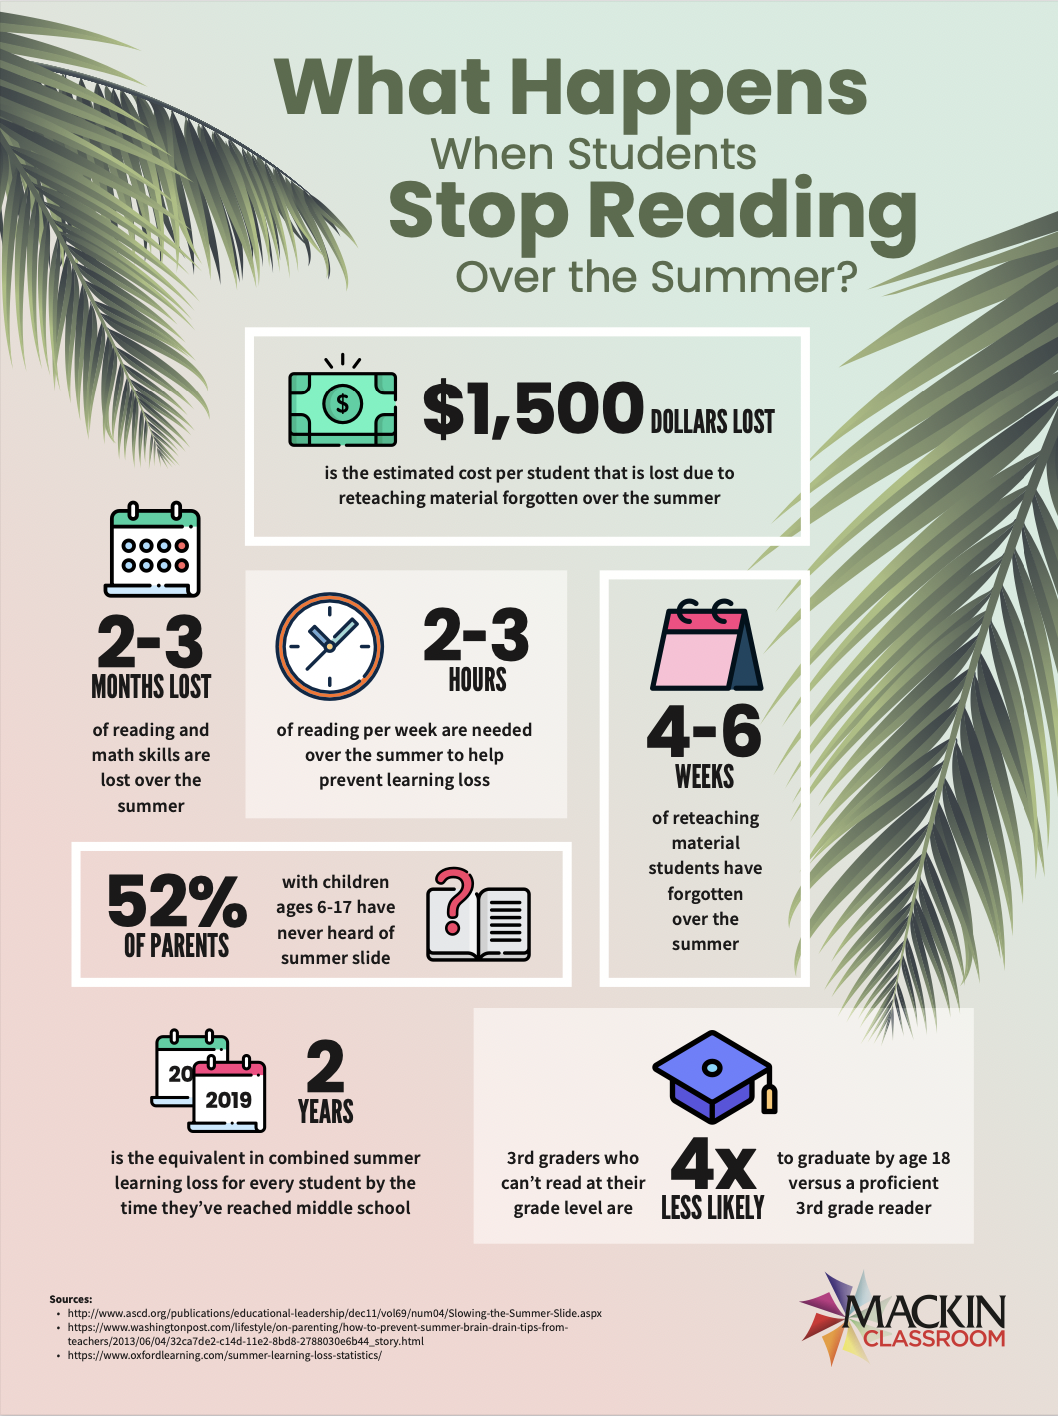 What happens when students stop reading over the summer?